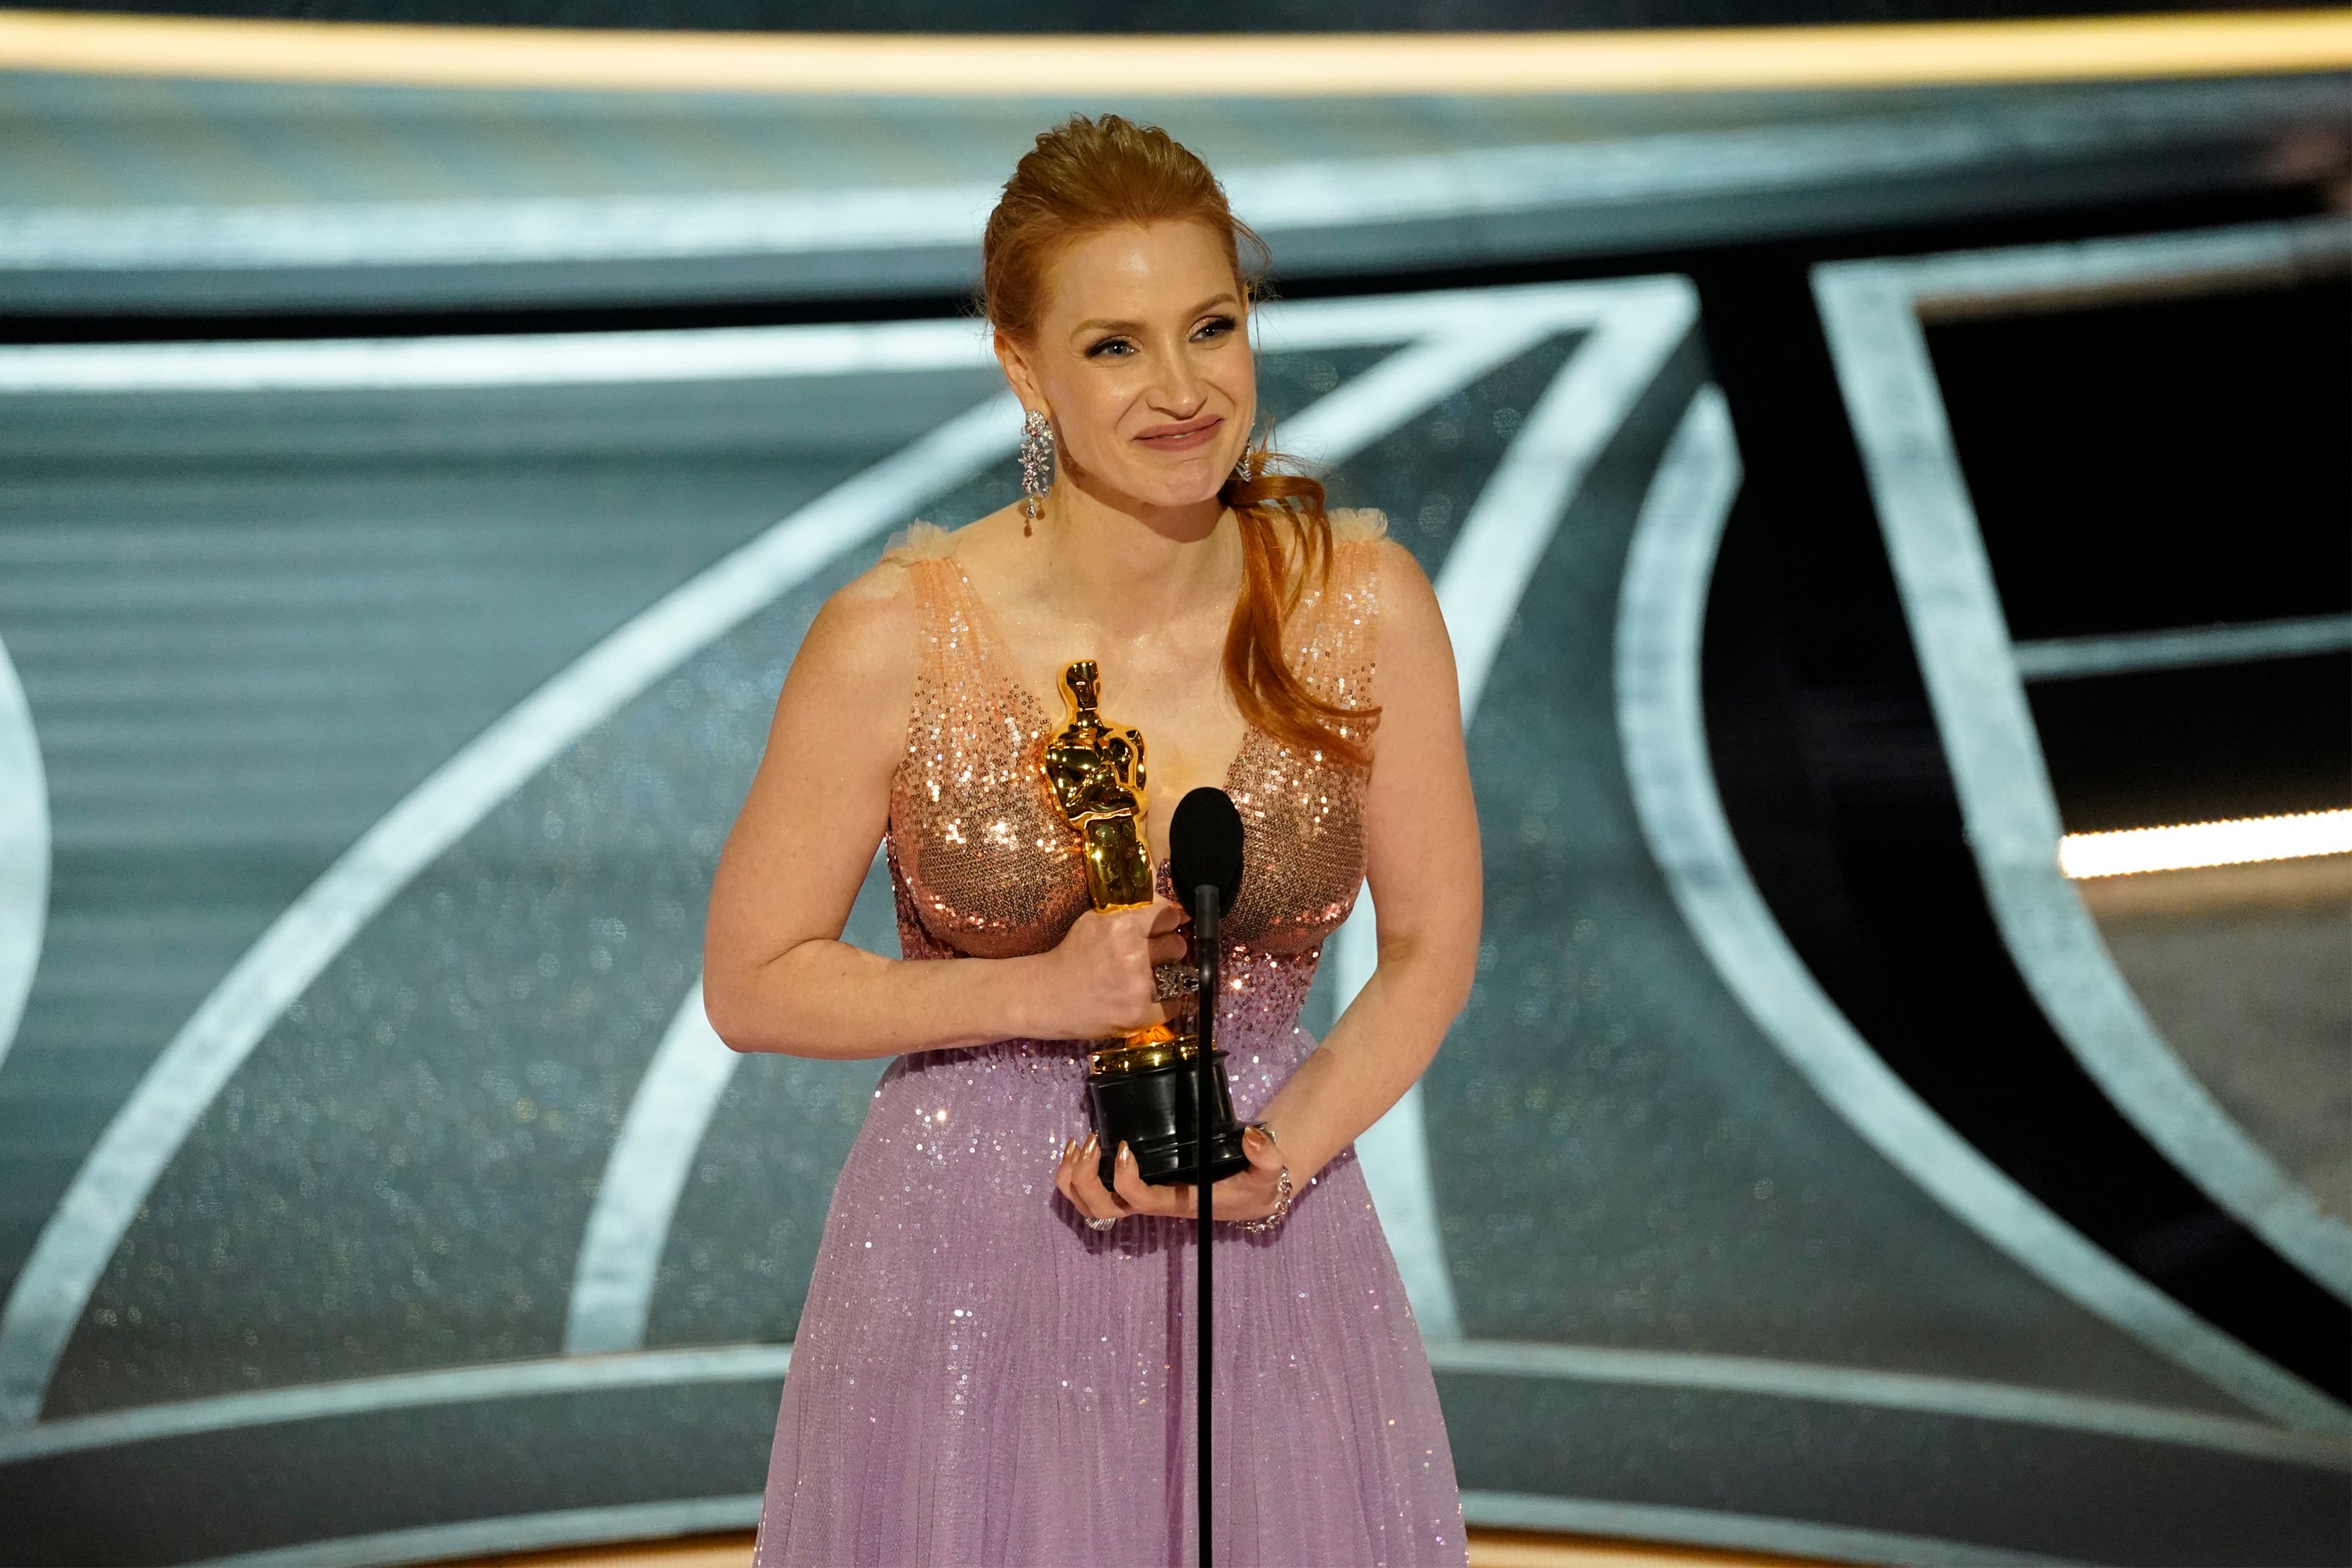 Jessica Chastain, 45, accepted the Best Actress award for portraying controversial tele-evangelist Tammy Faye in Michael Showalter’s ‘The Eyes of Tammy Faye’